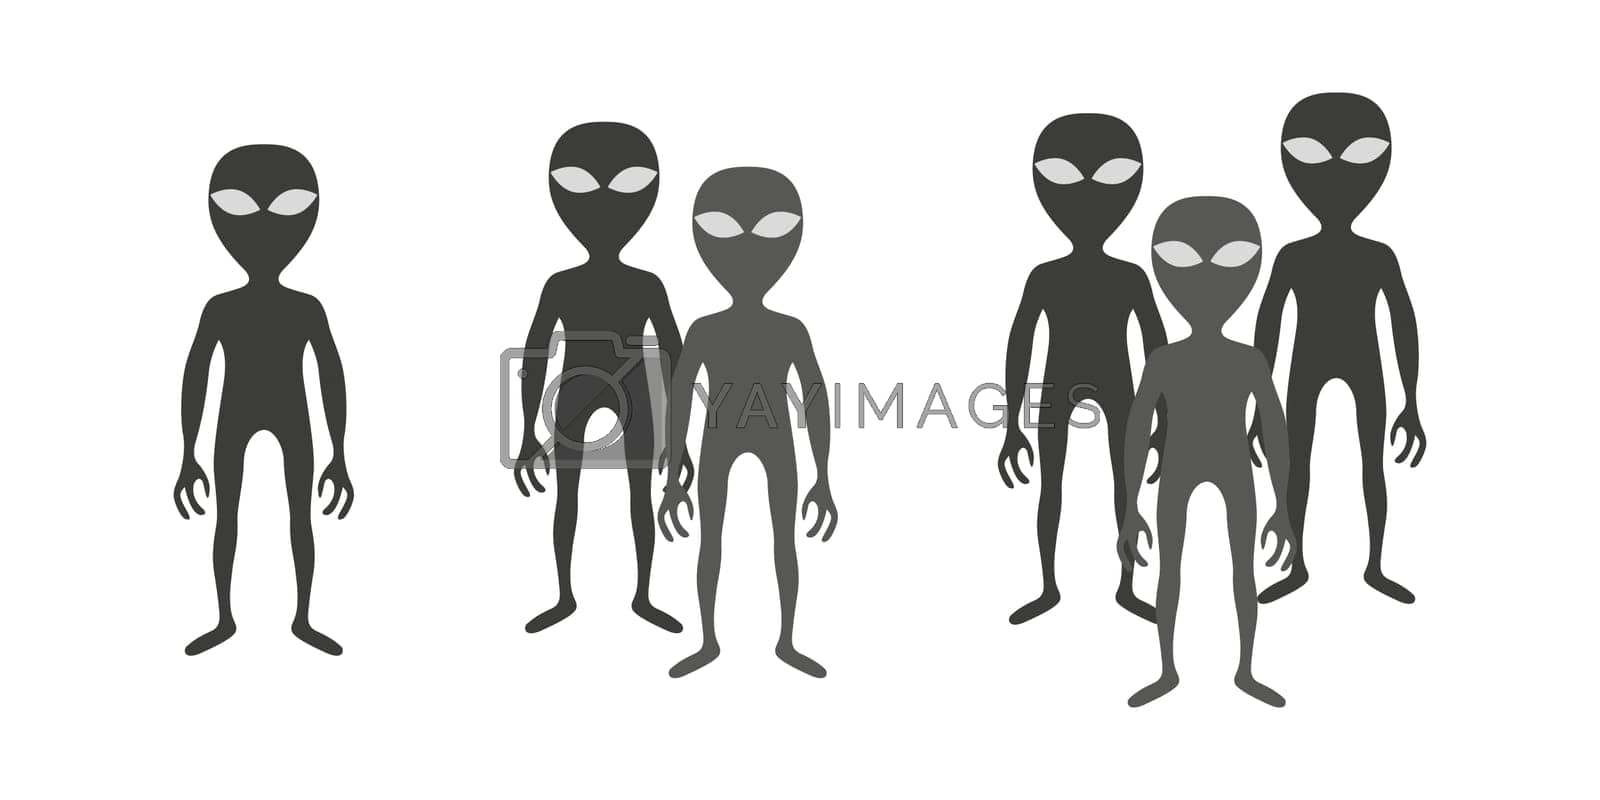 Royalty free image of Aliens set. Gray alien creatures in flat style by Mallva